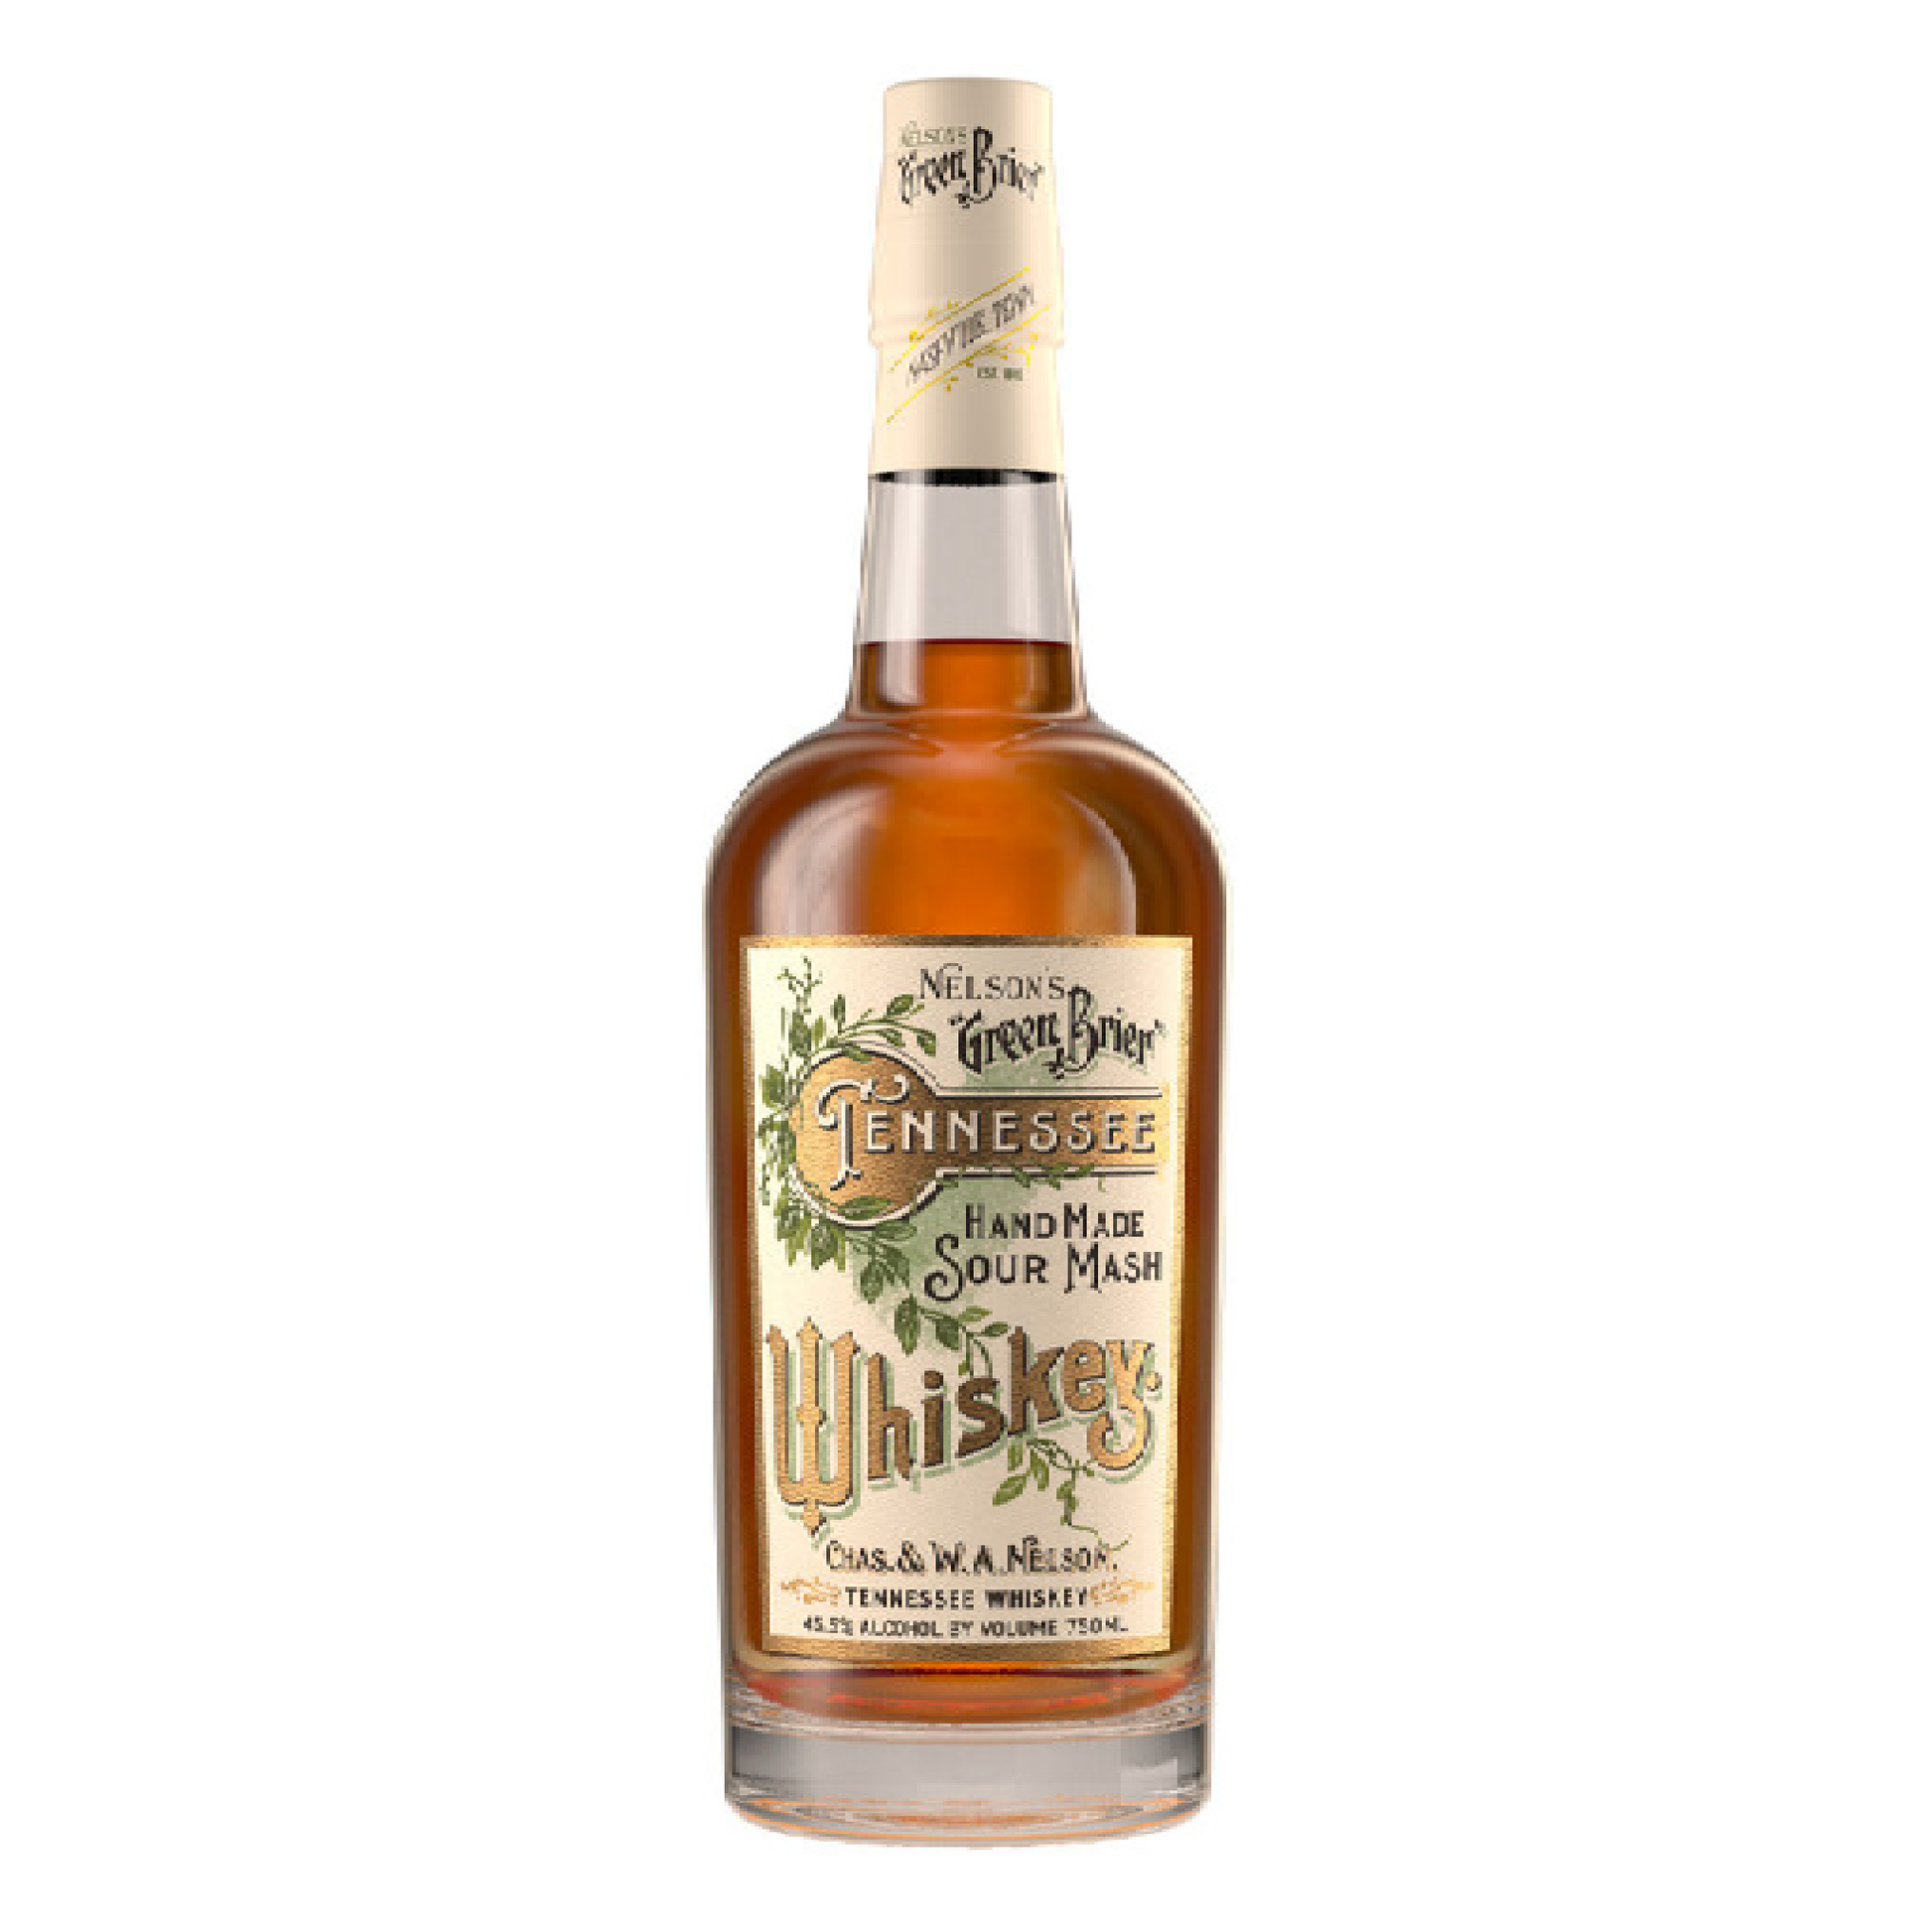 Nelson's Green Brier Tennessee Whiskey Hand Made Sour Mash - Liquor Geeks